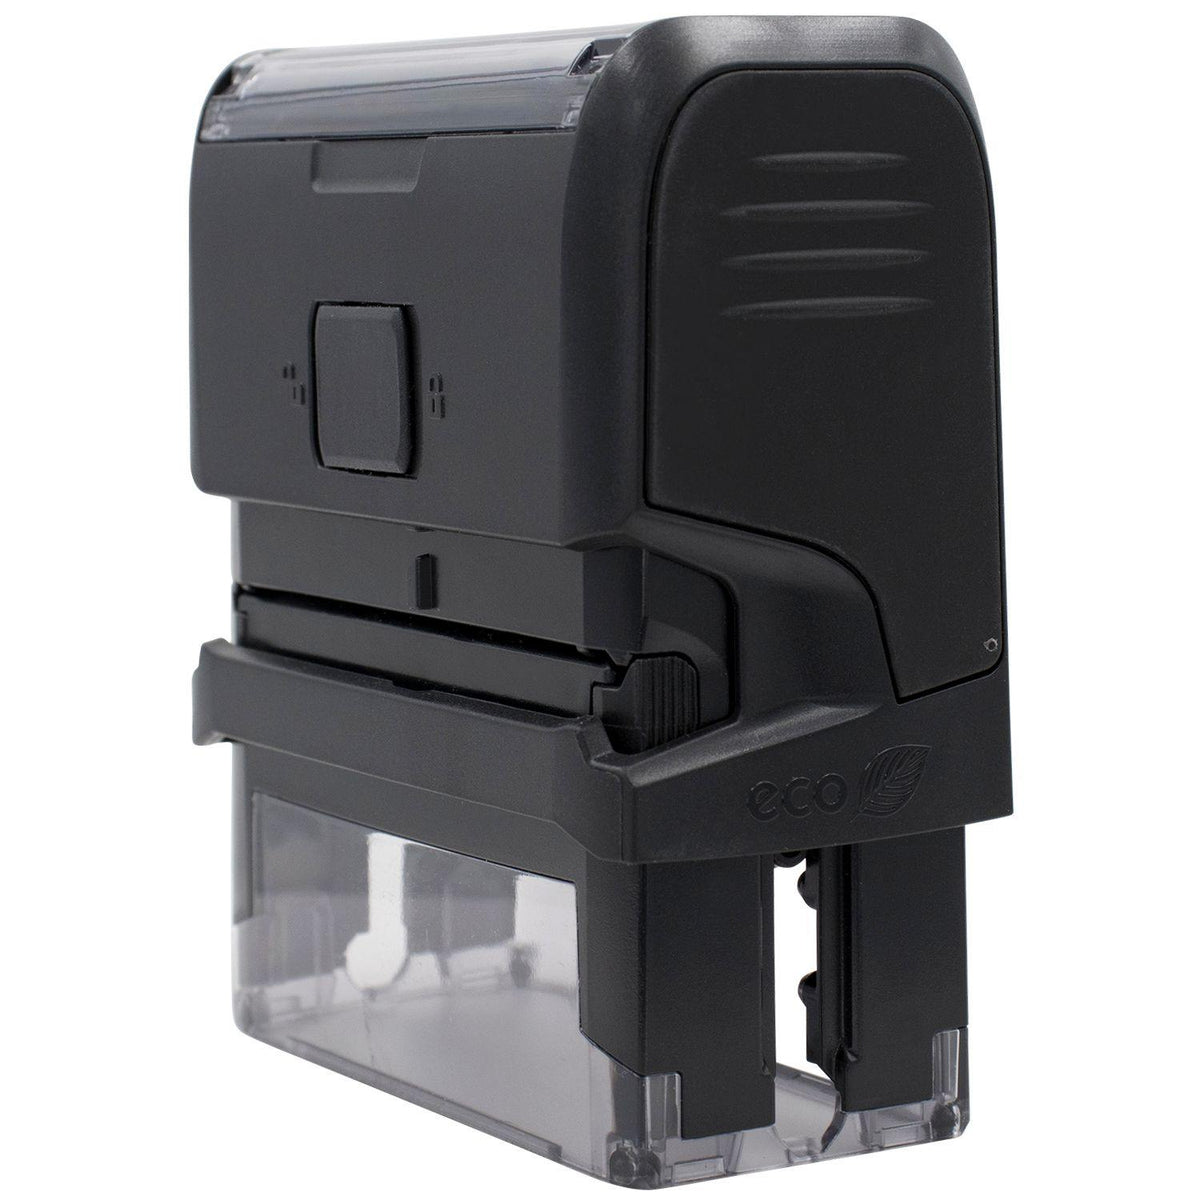 Self-Inking Importante Stamp - Engineer Seal Stamps - Brand_Trodat, Impression Size_Small, Stamp Type_Self-Inking Stamp, Type of Use_Business, Type of Use_General, Type of Use_Office